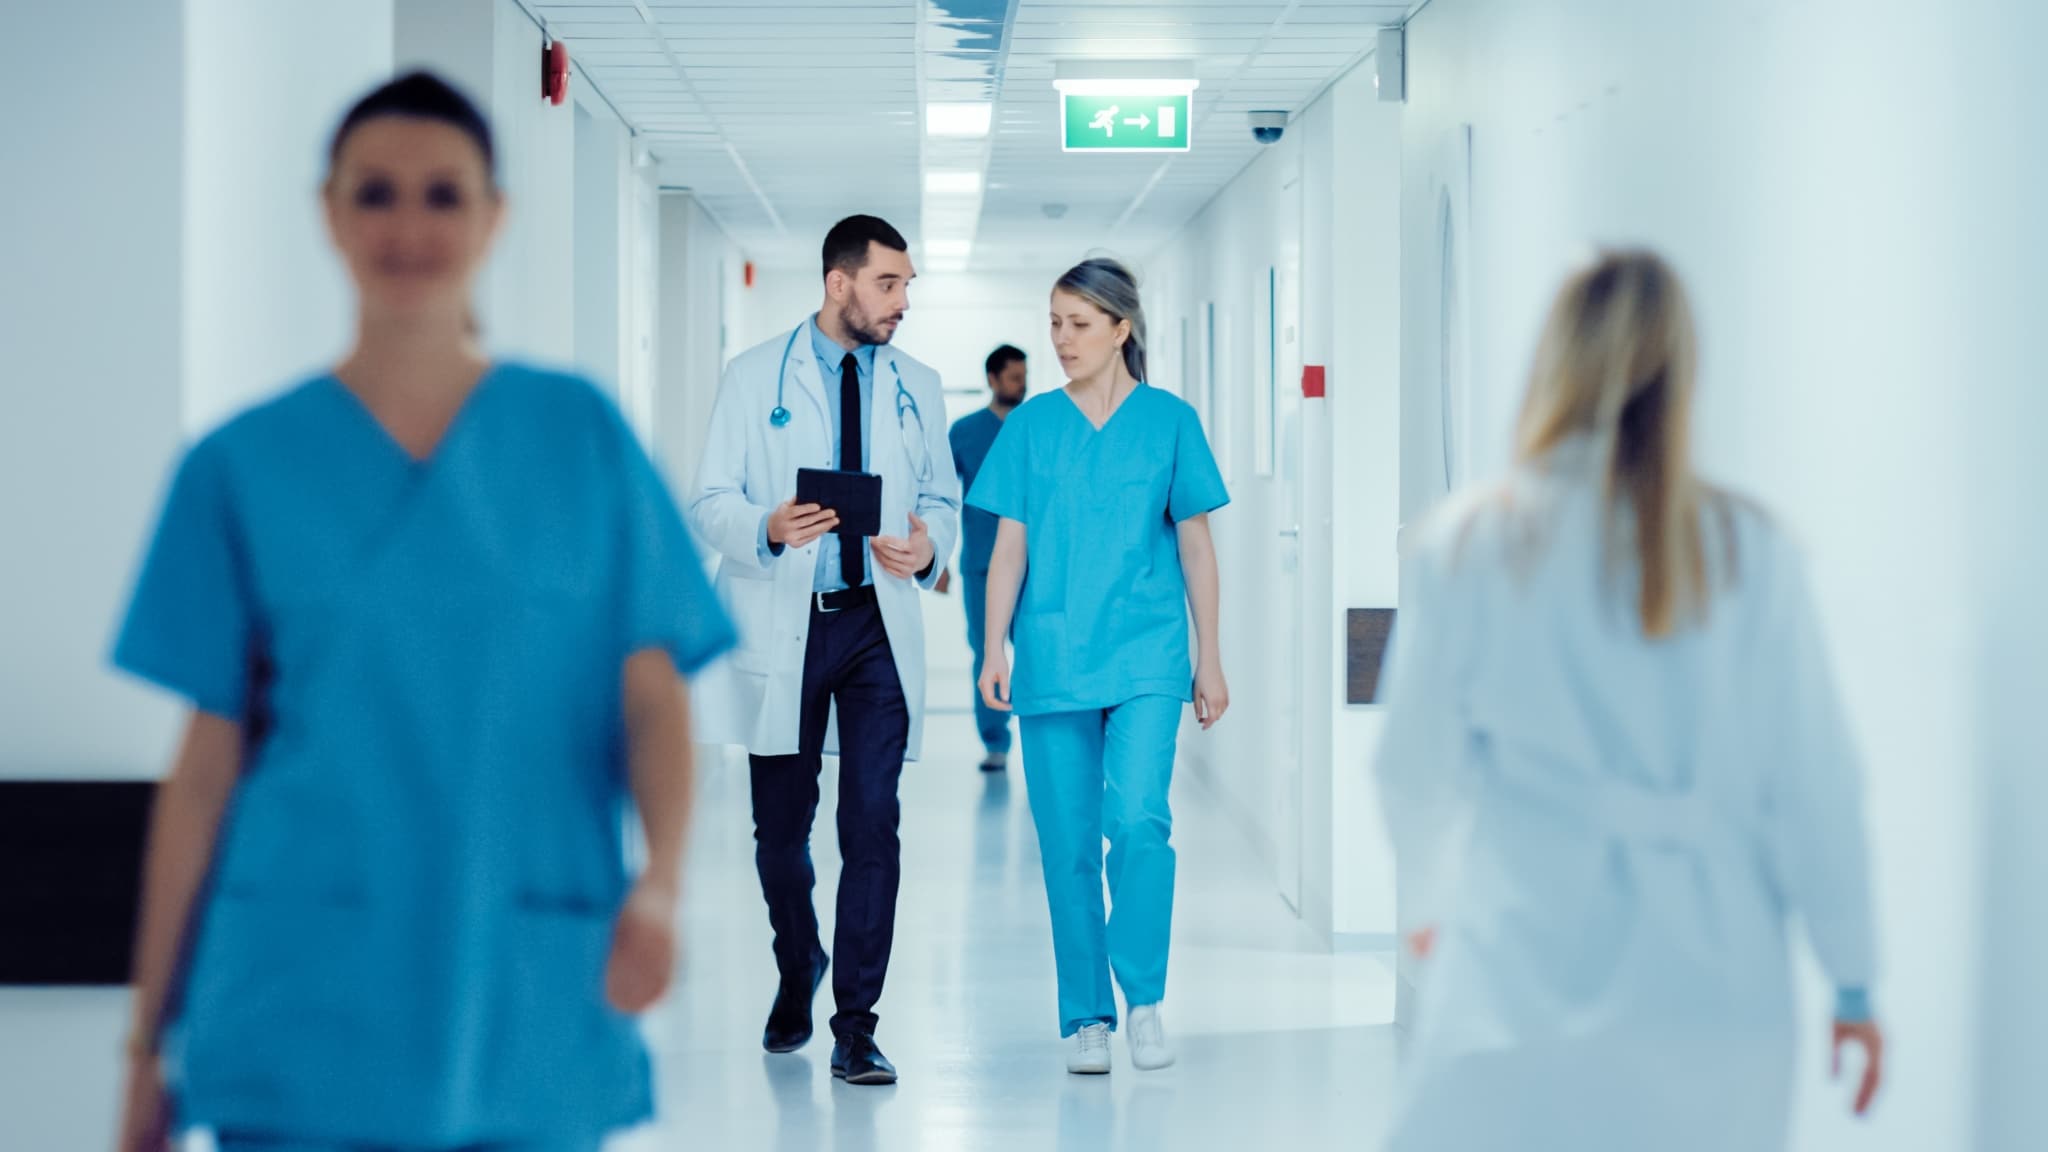 Healthcare professionals in a hospital hallway